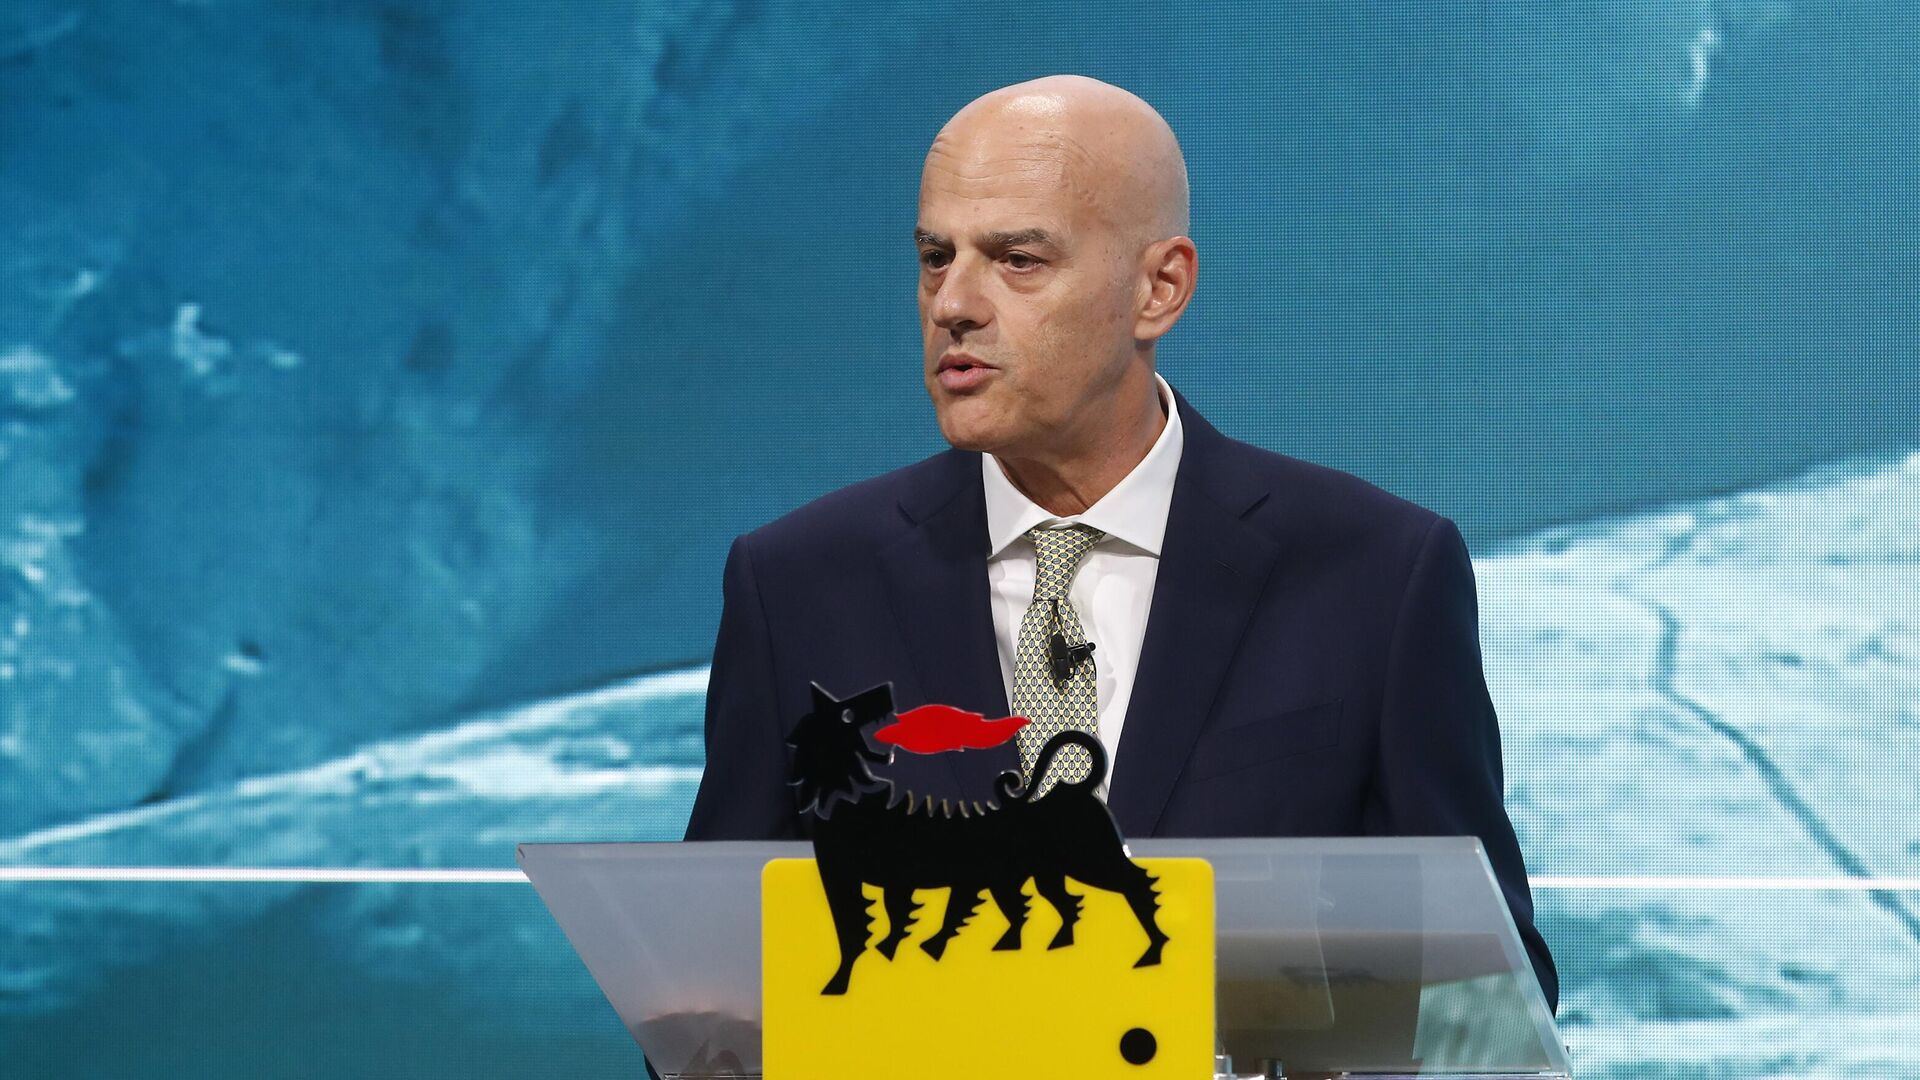 In this Friday, March 15, 2019 file photo, ENI CEO Claudio Descalzi delivers his speech during the 2019-22 ENI strategy presentation in San Donato Milanese, Milan, Italy.  - Sputnik International, 1920, 24.01.2023